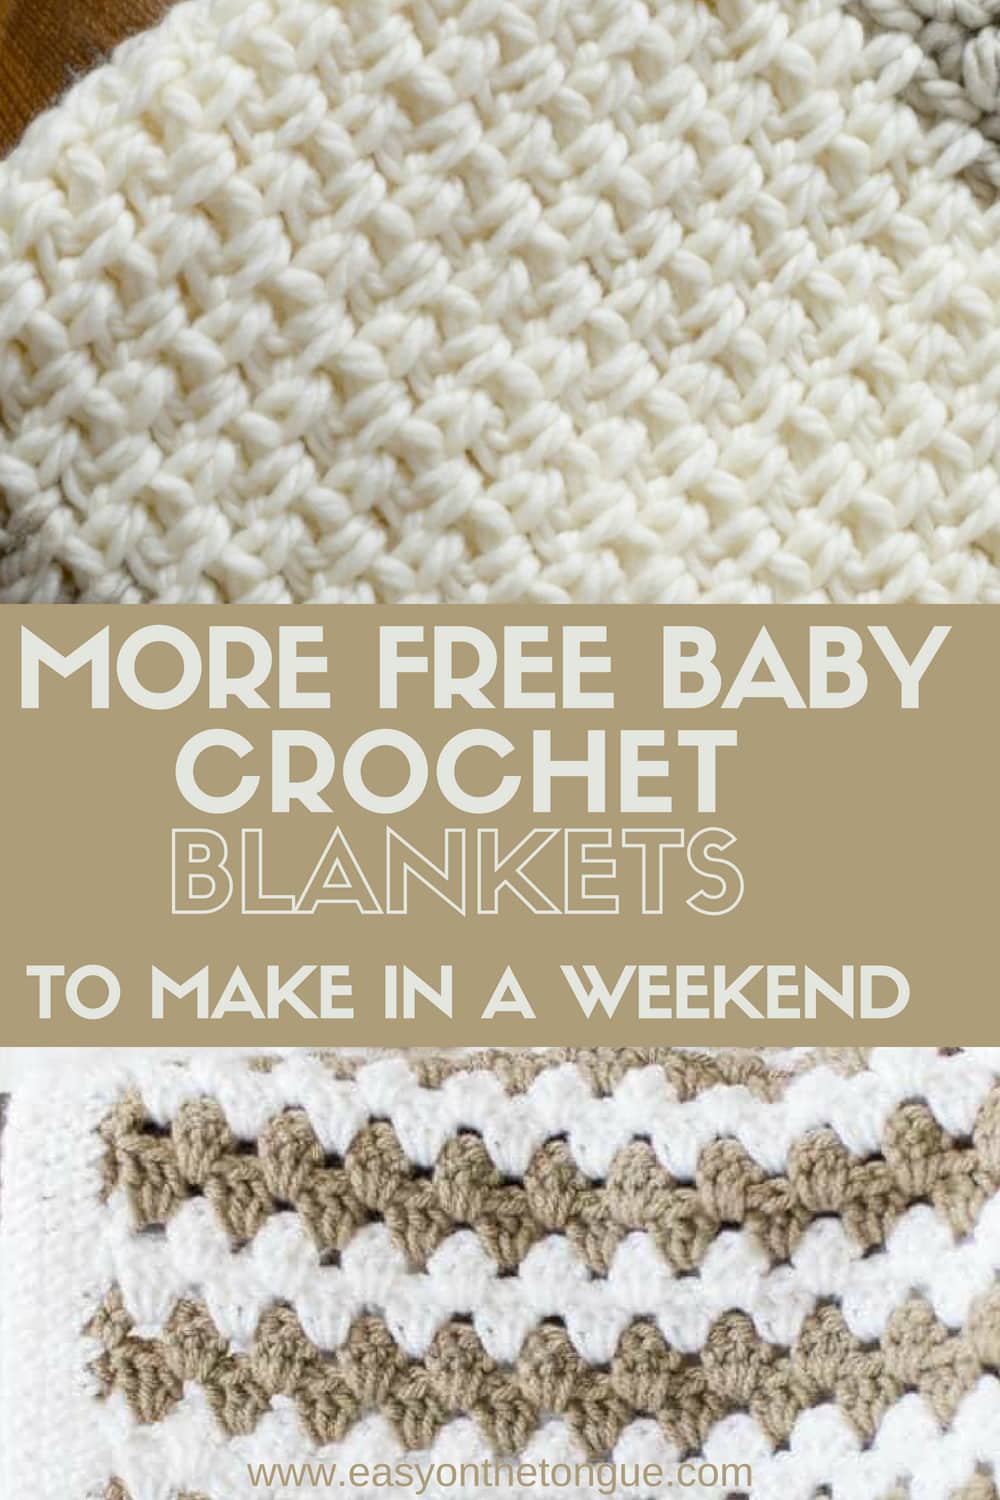 More Free Baby Crochet Blankets to make in a weekend Small Crochet Squares to create the most Amazing Picture Blankets